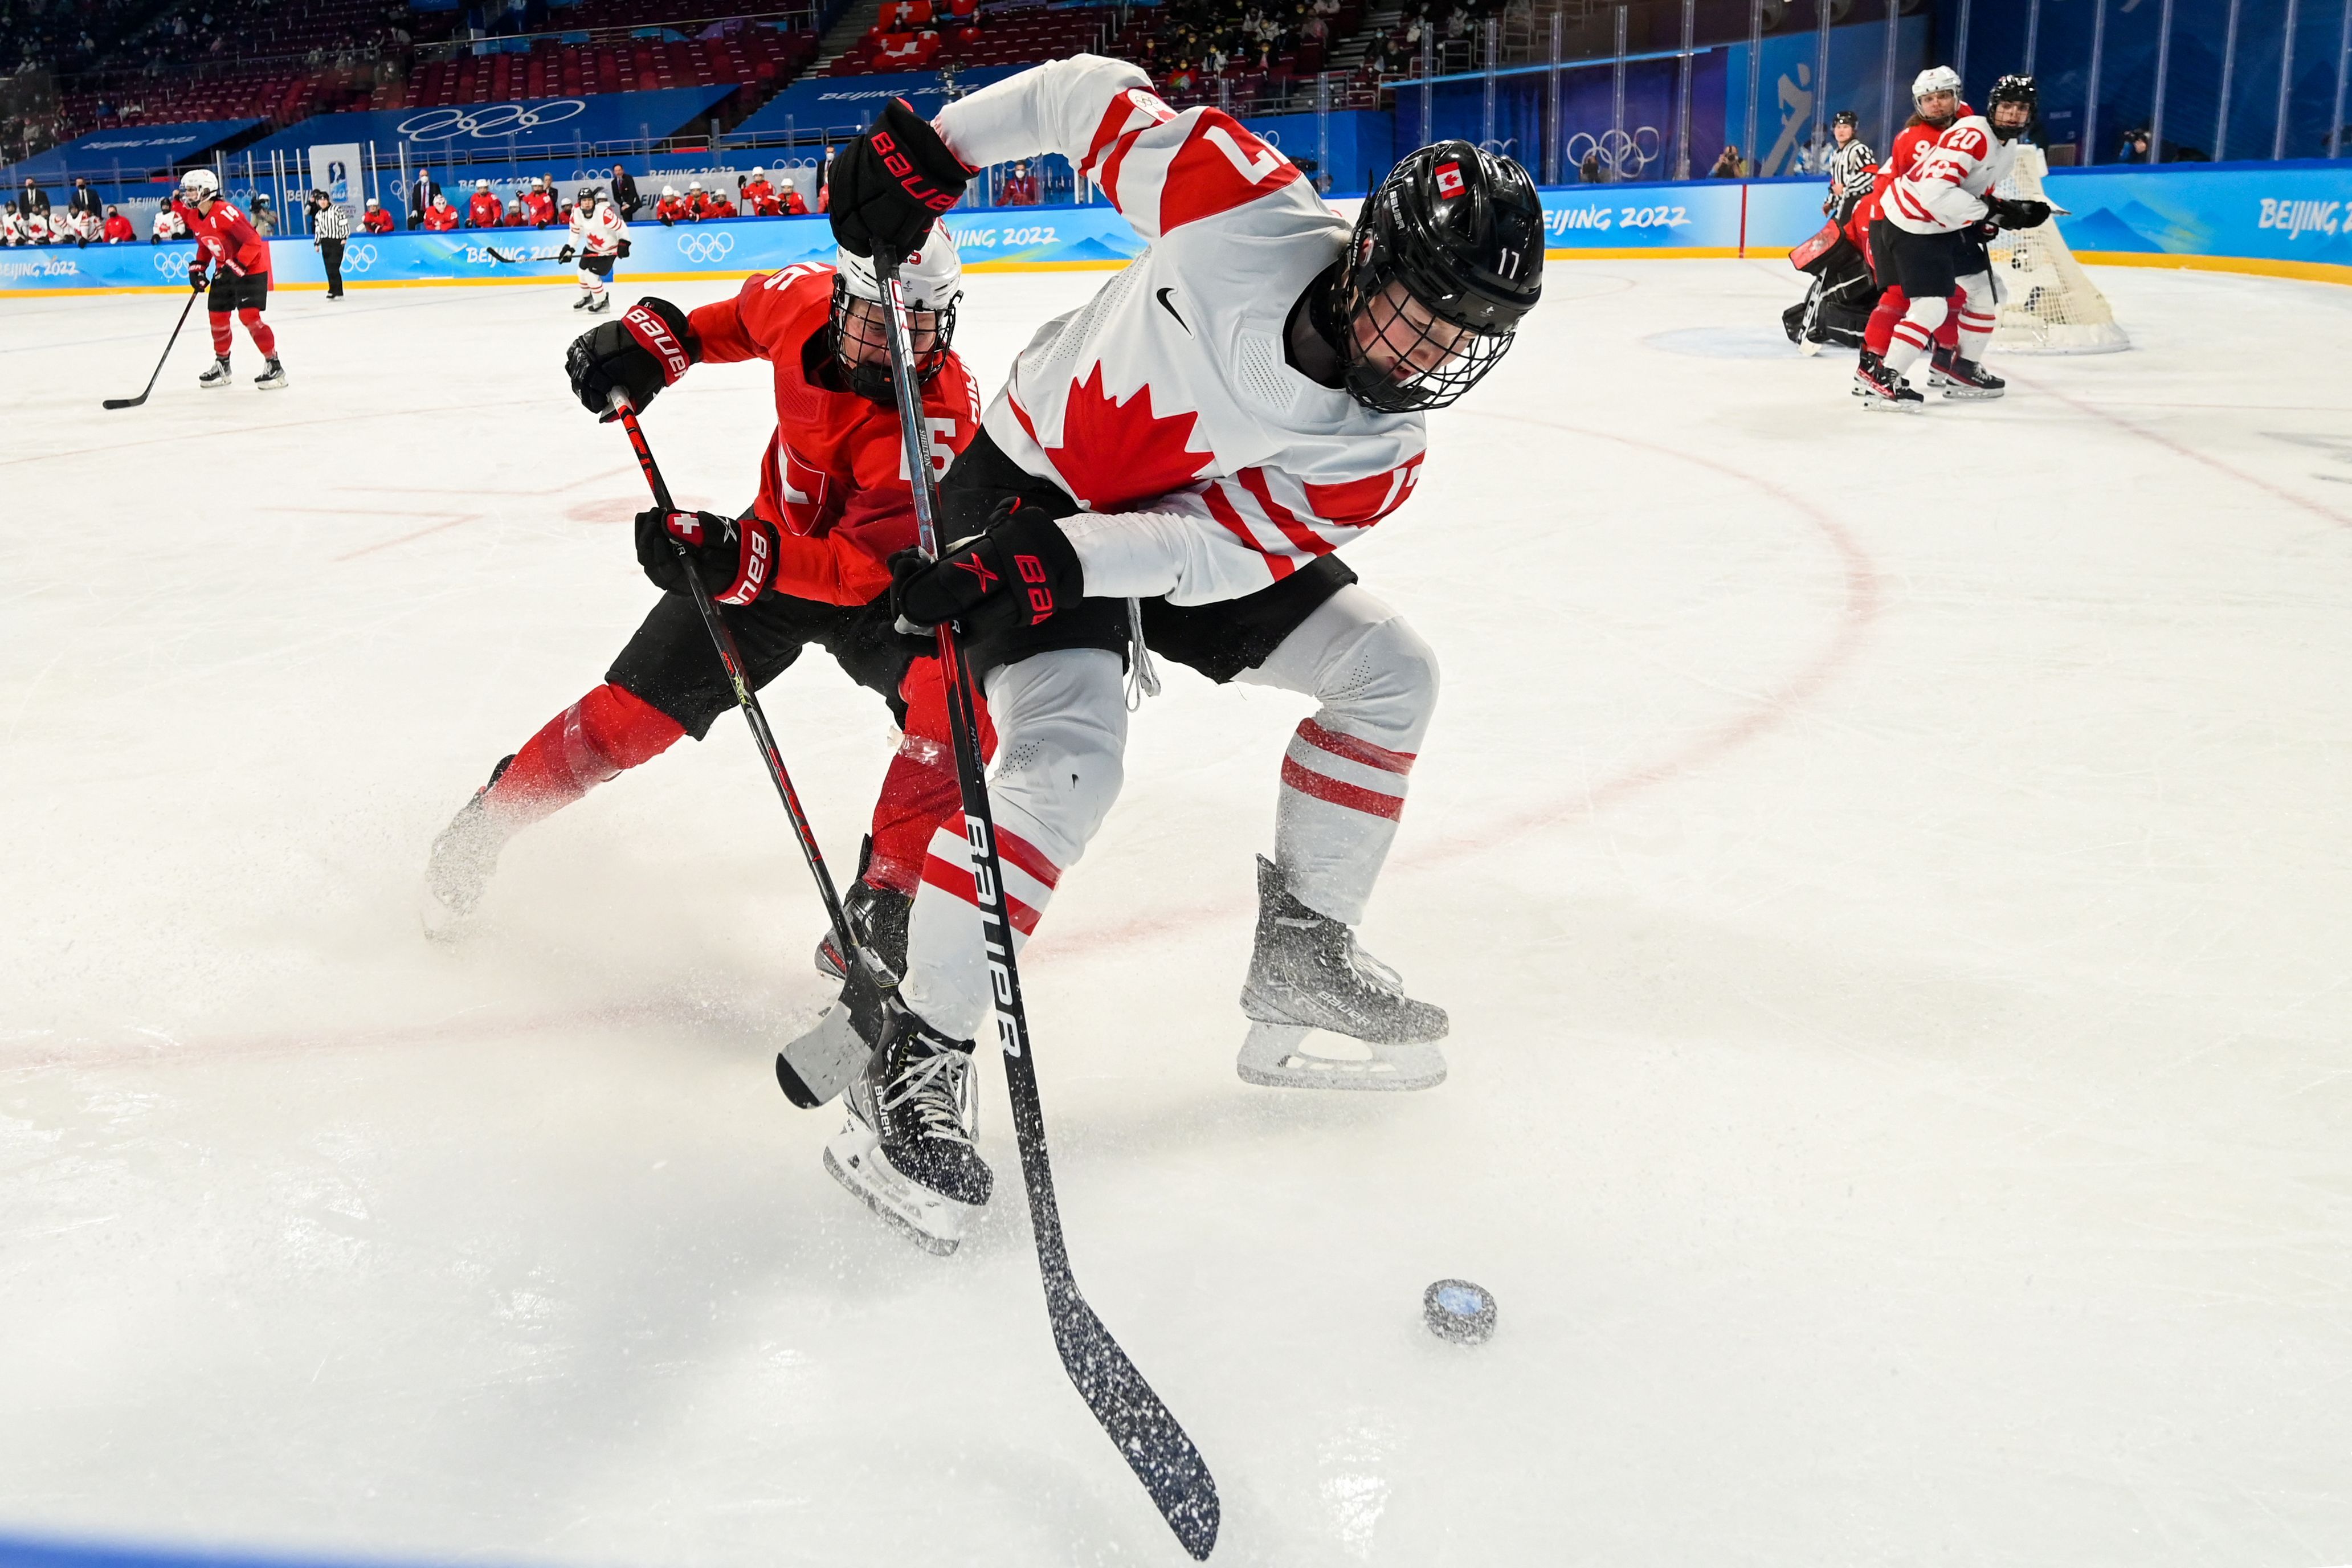 Canada's Ella Shelton (R) and Switzerland's Laura Zimmermann fight for the puck during the women's play-offs semifinal match of the Beijing 2022 Winter Olympic Games ice hockey competition 